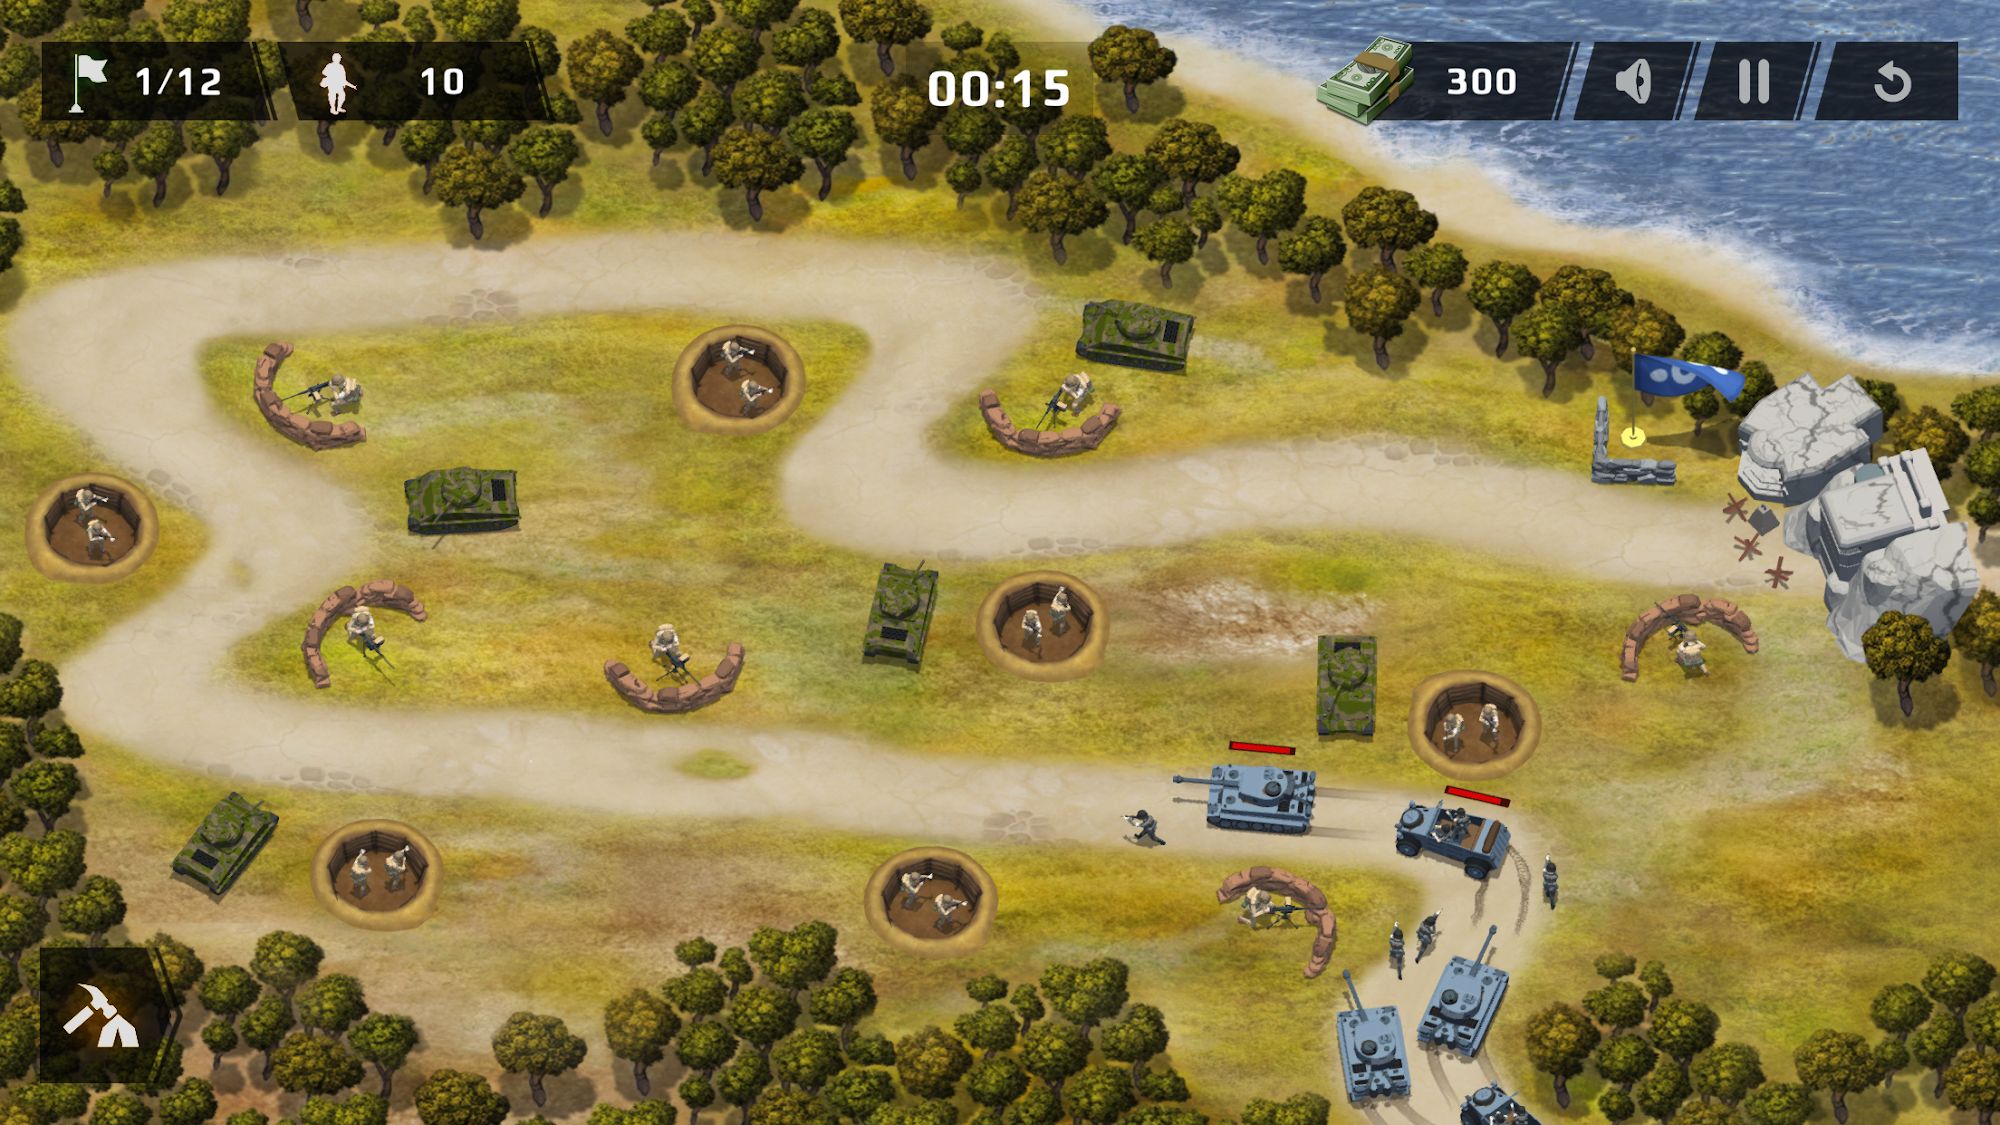 Scarica WWII Defense: RTS Army TD game gratis per Android A.n.d.r.o.i.d. .5...0. .a.n.d. .m.o.r.e.